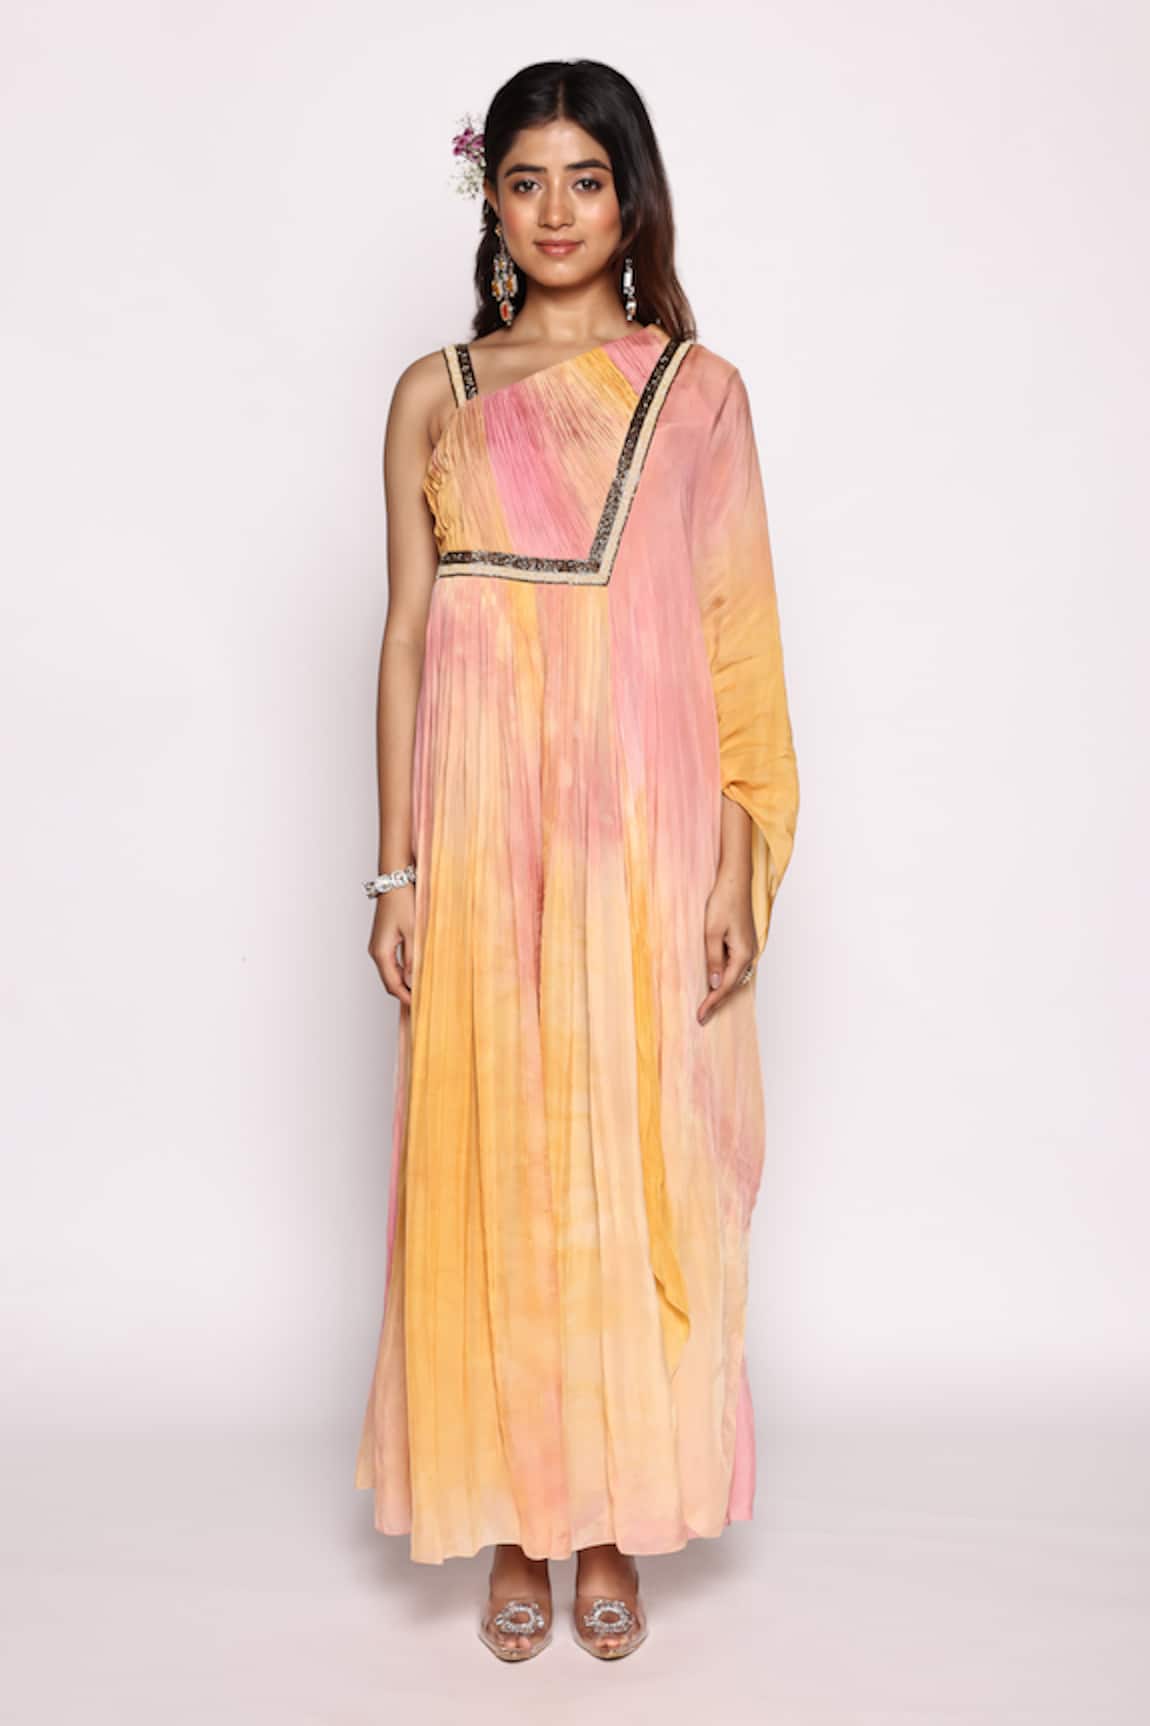 ABSTRACT BY MEGHA JAIN MADAAN Ombre Embellished Ruched Bodice Jumpsuit With Attached Dupatta